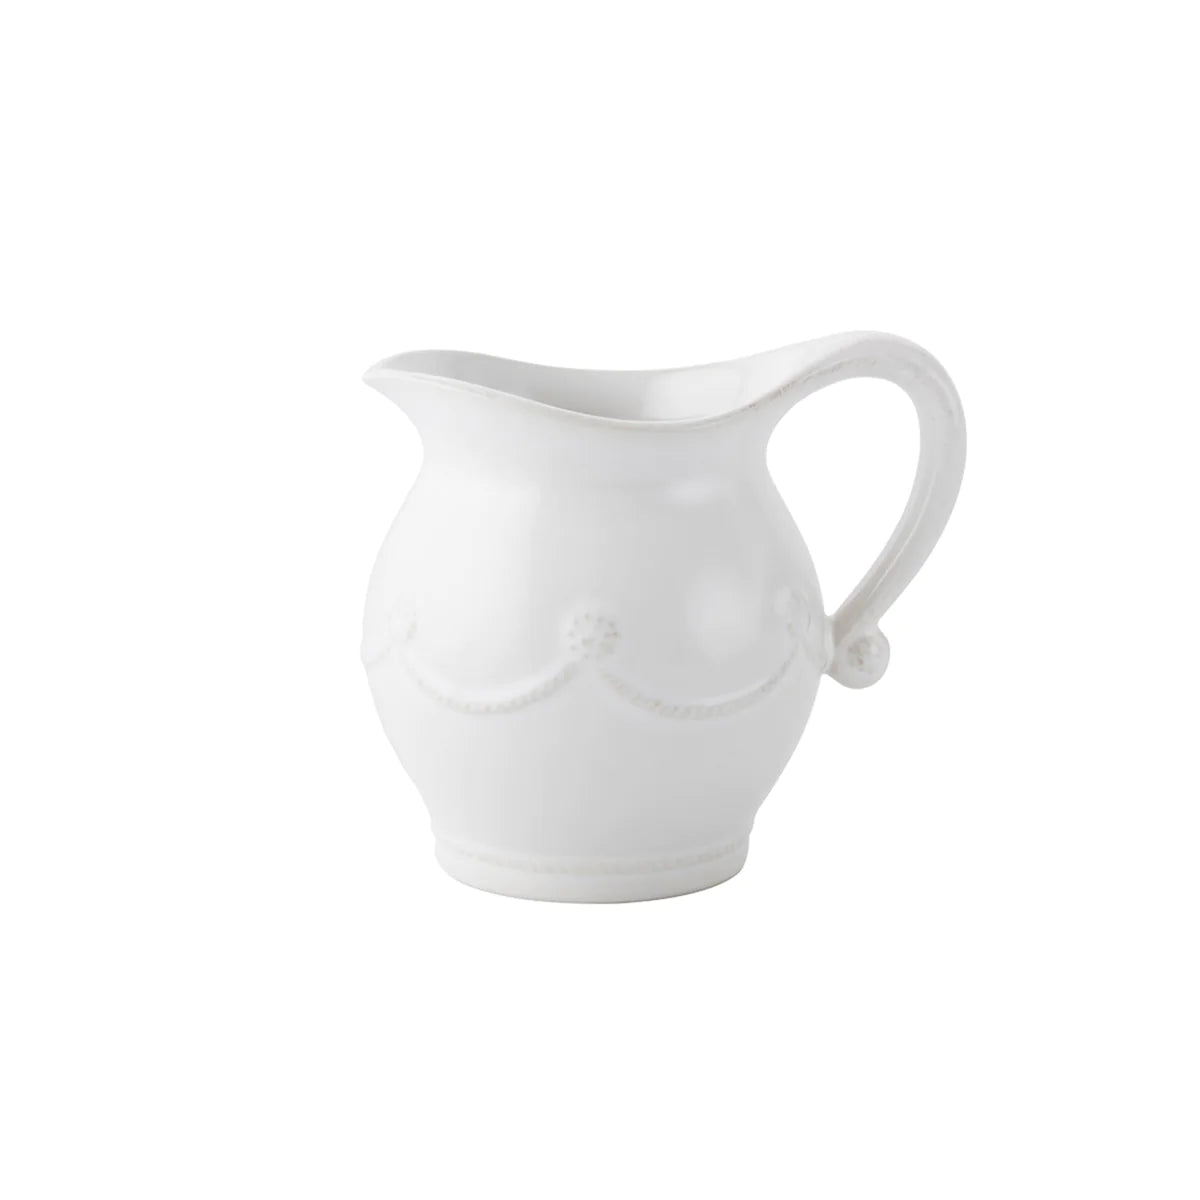 Wallace-Hester Wedding Registry Items